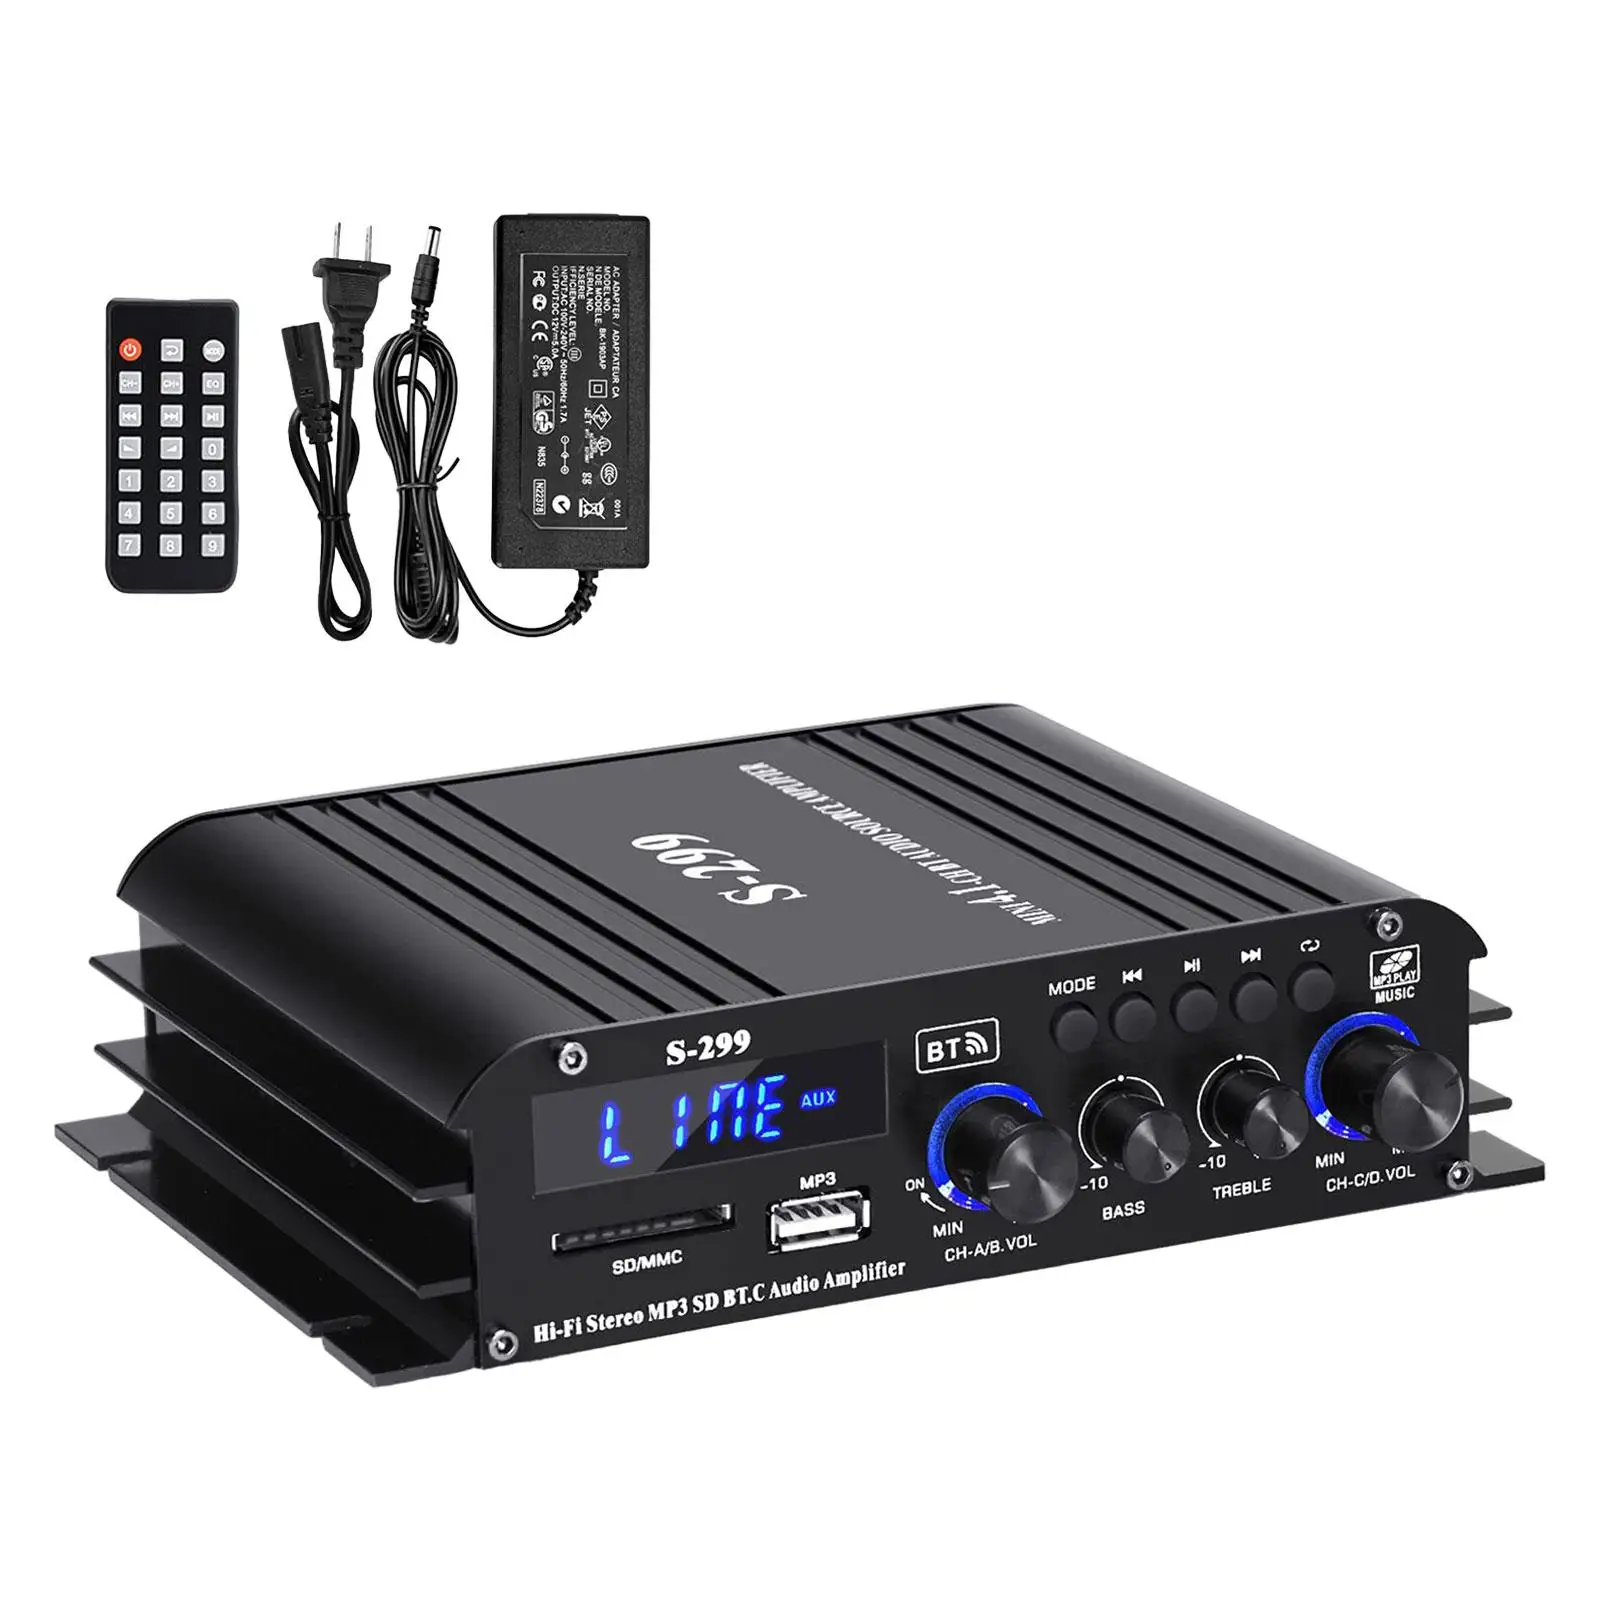 Digital Power Amplifier 4.1 Channel LCD Display Mini HiFi Stereo Amp USB AUX BT SD for Store Home Theater with Remote Control